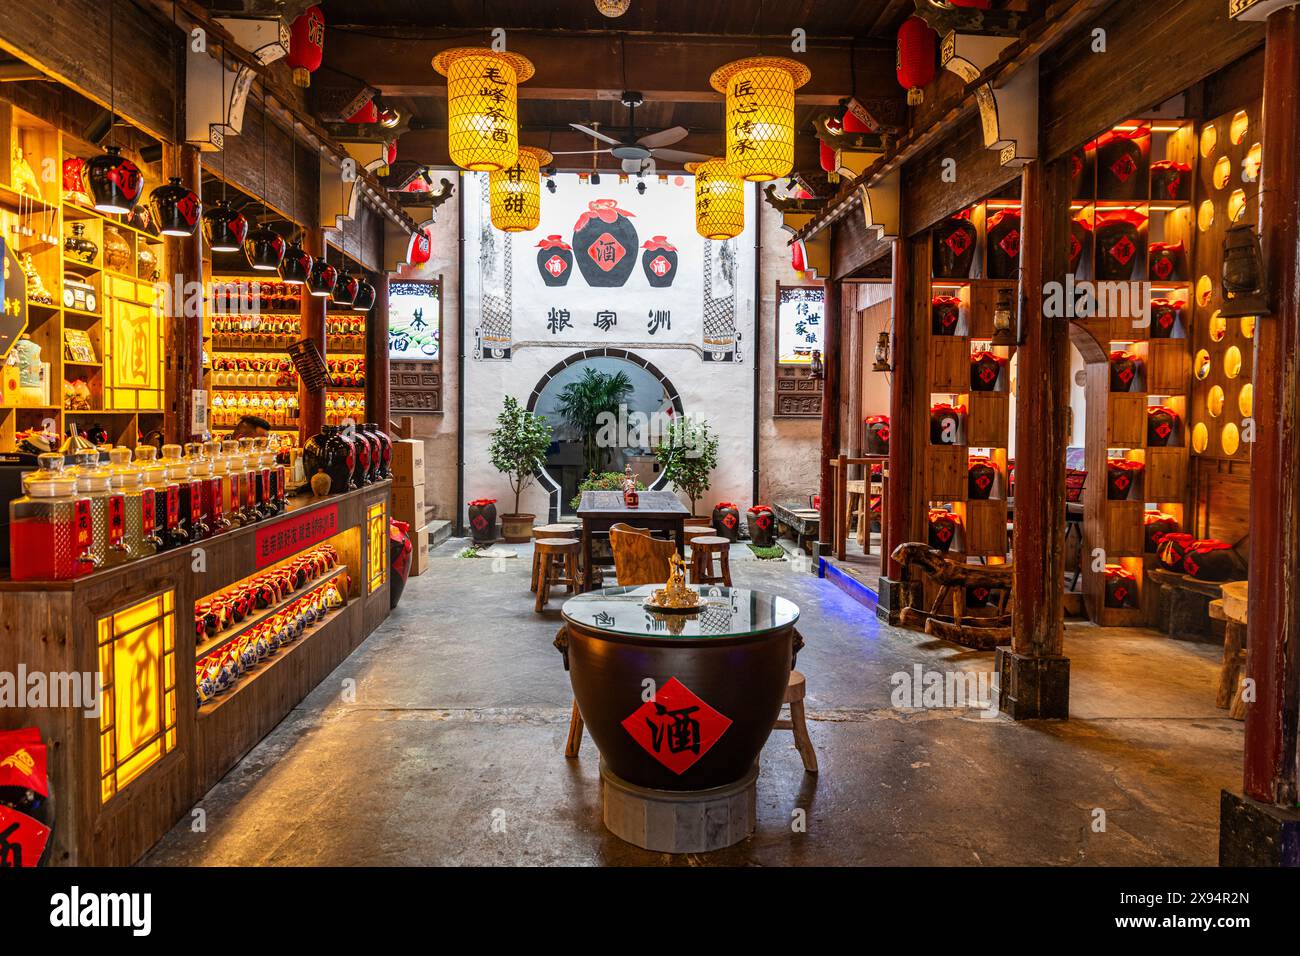 Tea shop in the historic ancient village of Xidi, Anhui, China, Asia Stock Photo